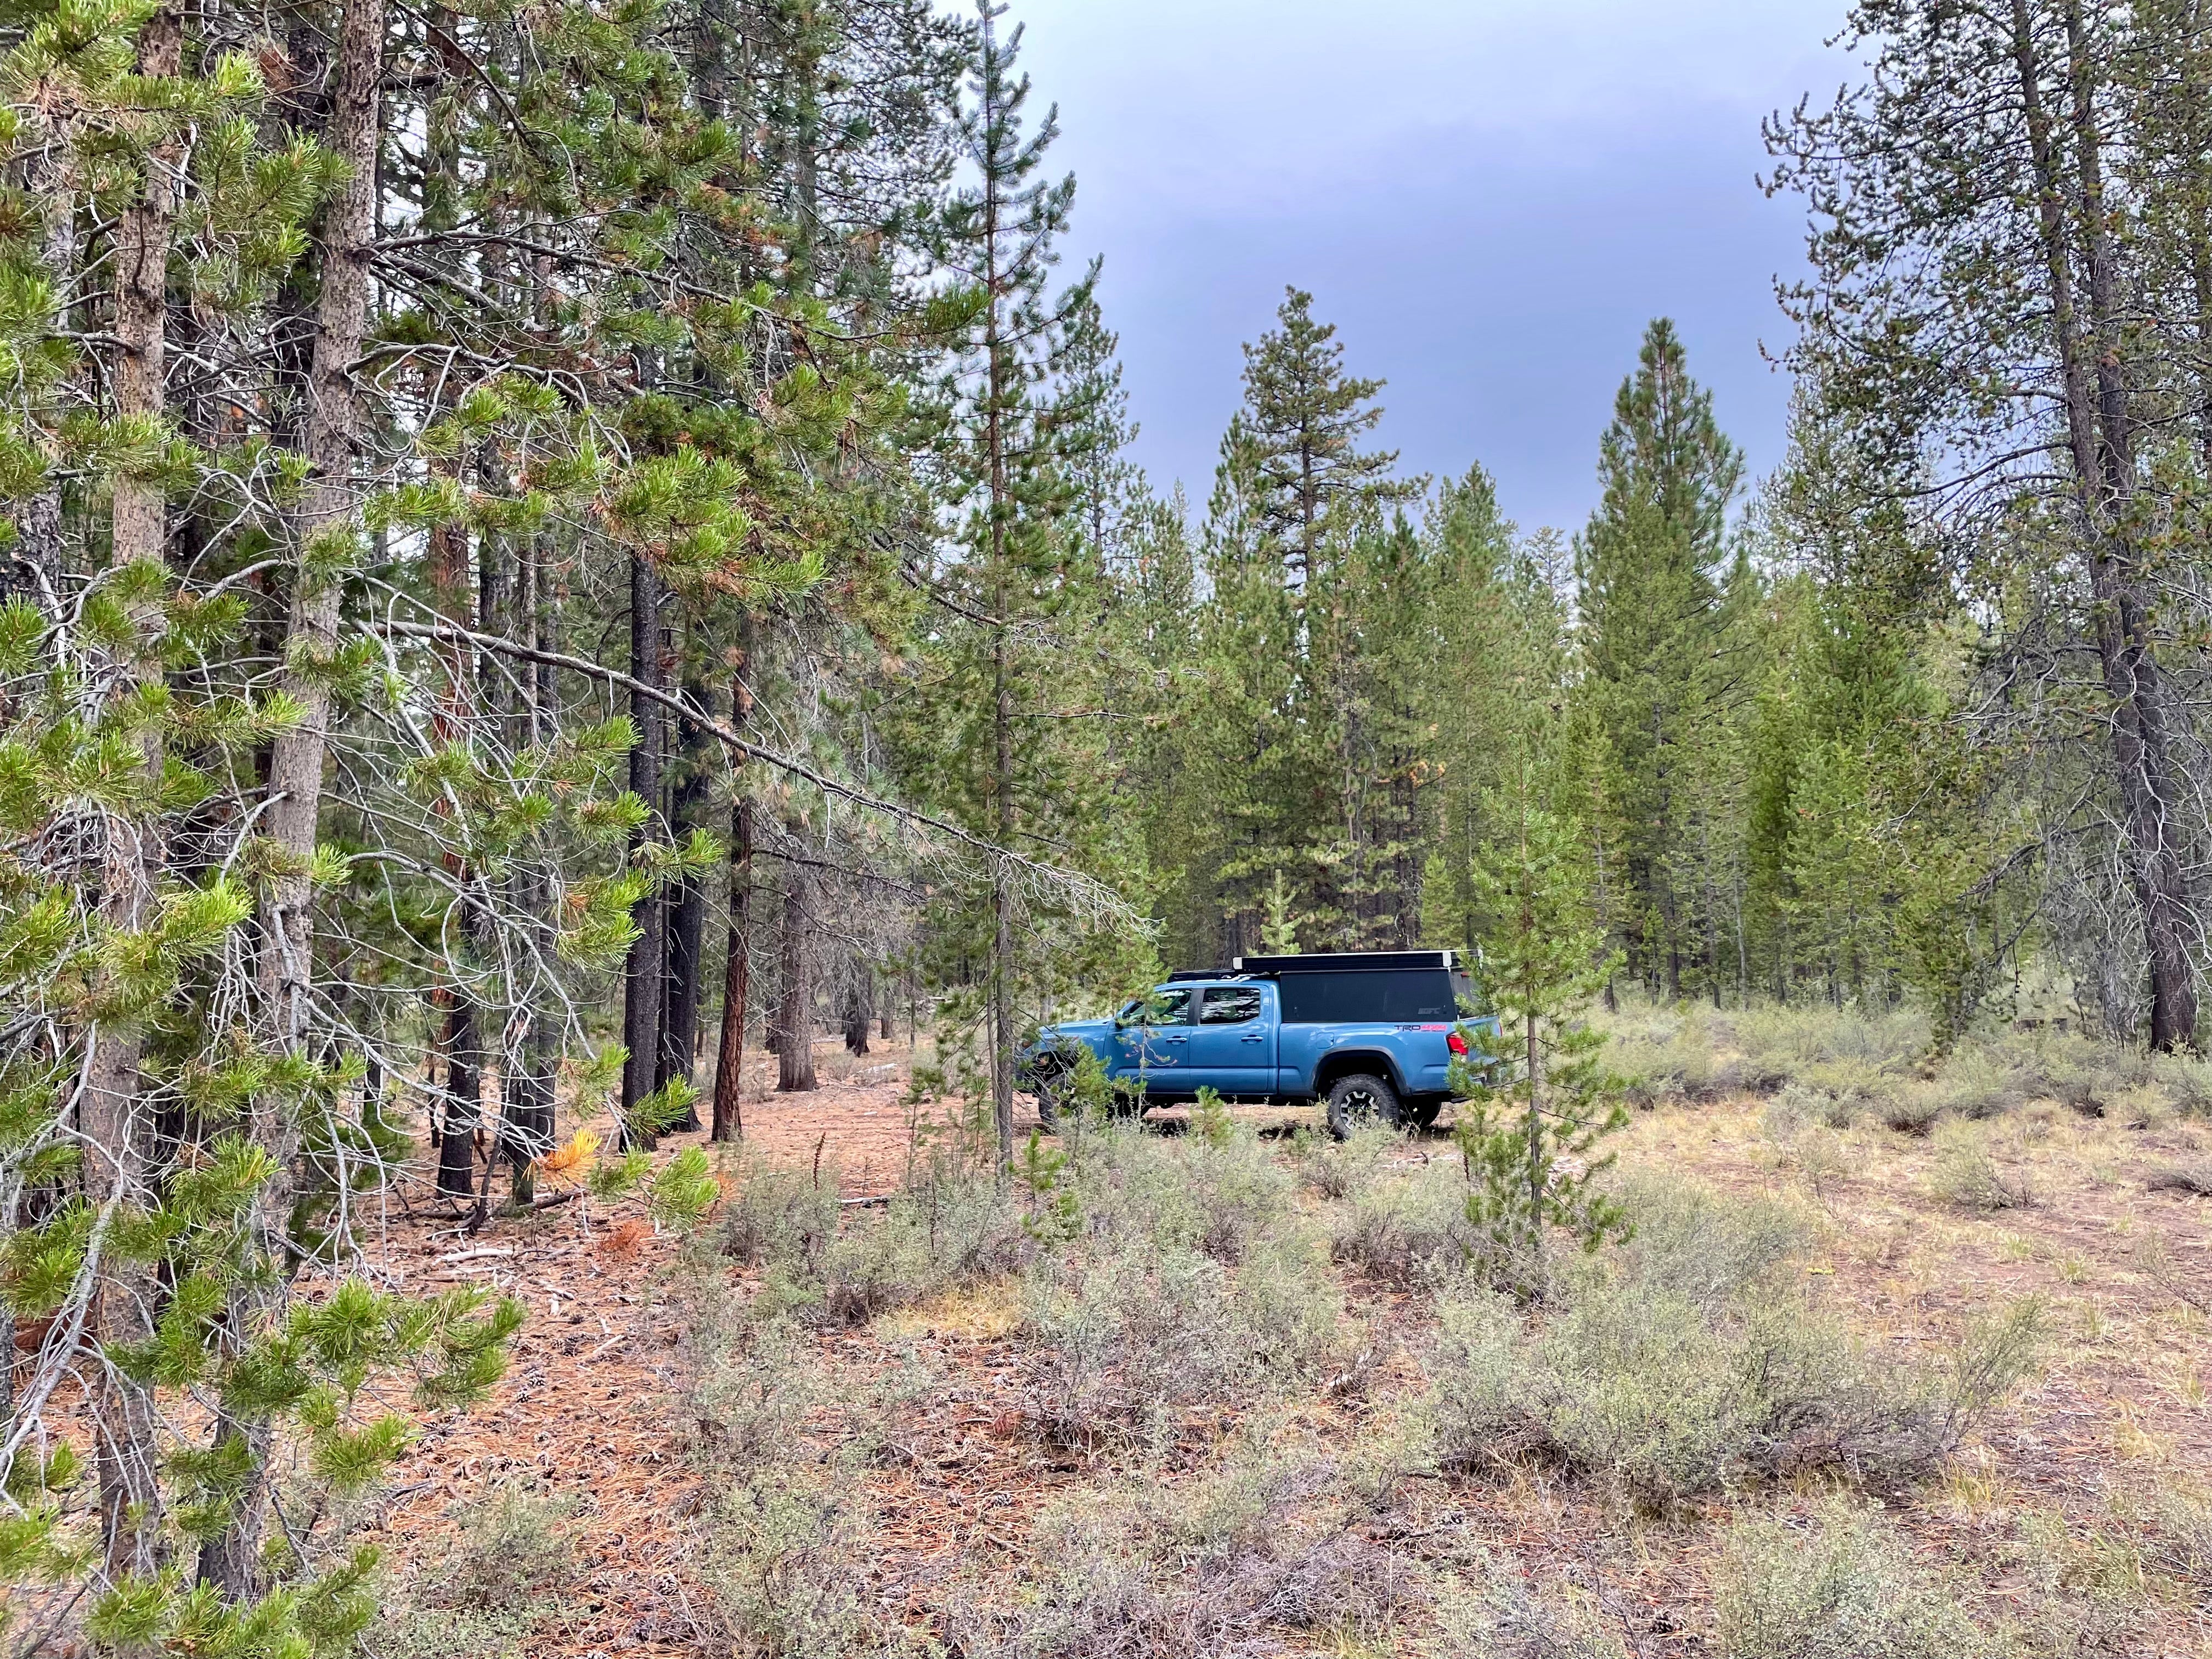 Camper submitted image from NF-70 Dispersed Camping Near Crater Lake NP - 4